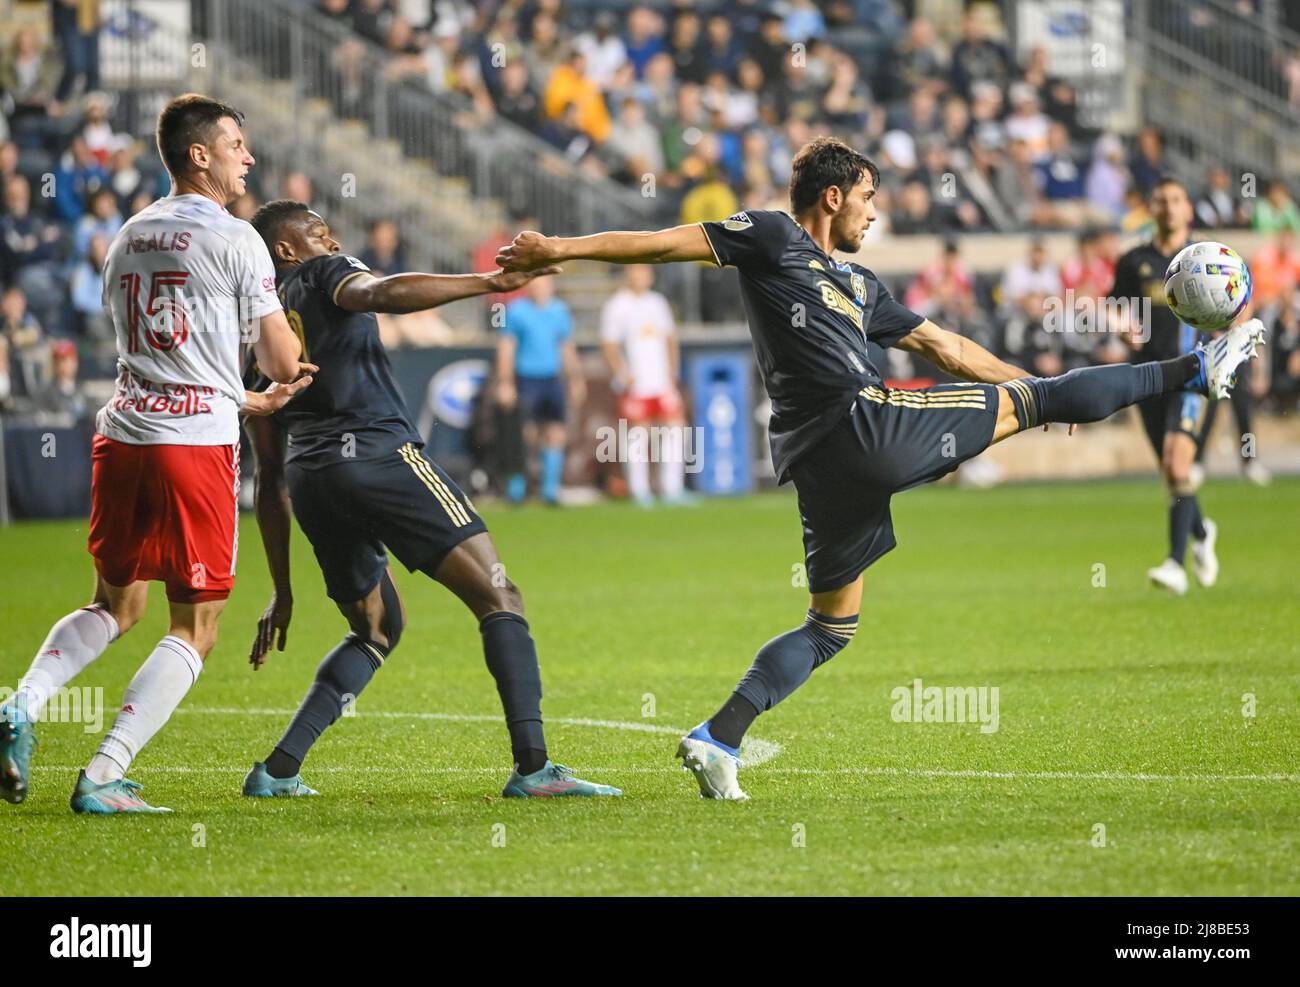 Chester, Pennsylvania, USA. 14th May, 2022. May 14, 2022, Chester PA- Philadelphia Union players NATHAN HARRIEL (26) and CORY BURKE (19) and New York Red Bull player SEAN NEALIS (15) fight for the ball during the match at Subaru Park (Credit Image: © Ricky Fitchett/ZUMA Press Wire) Credit: ZUMA Press, Inc./Alamy Live News Stock Photo